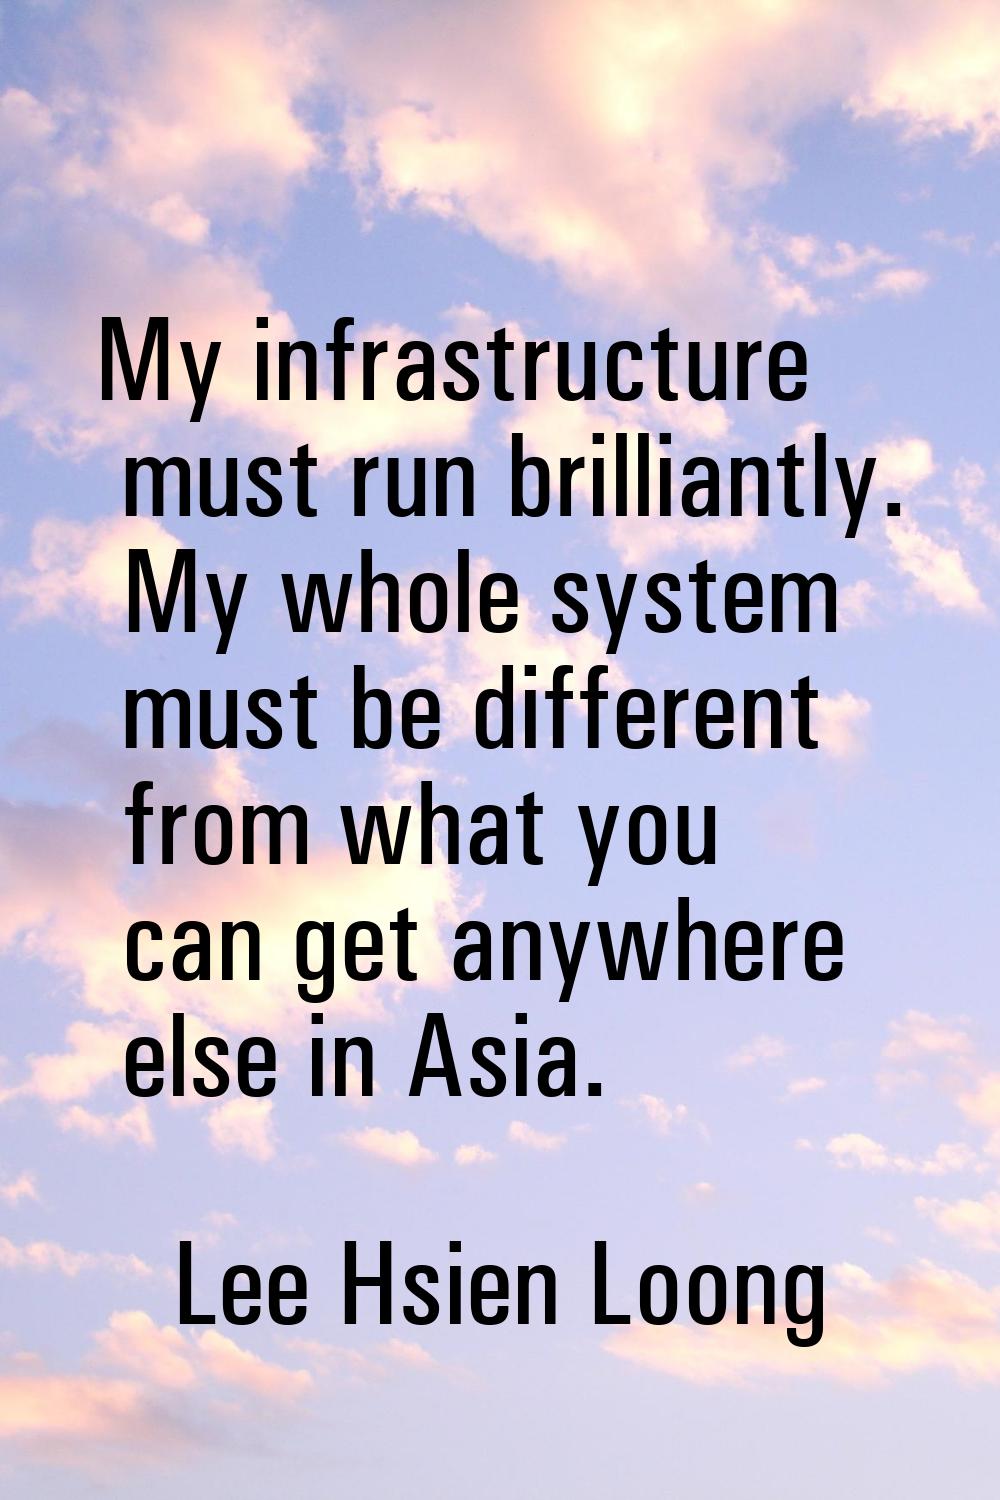 My infrastructure must run brilliantly. My whole system must be different from what you can get any